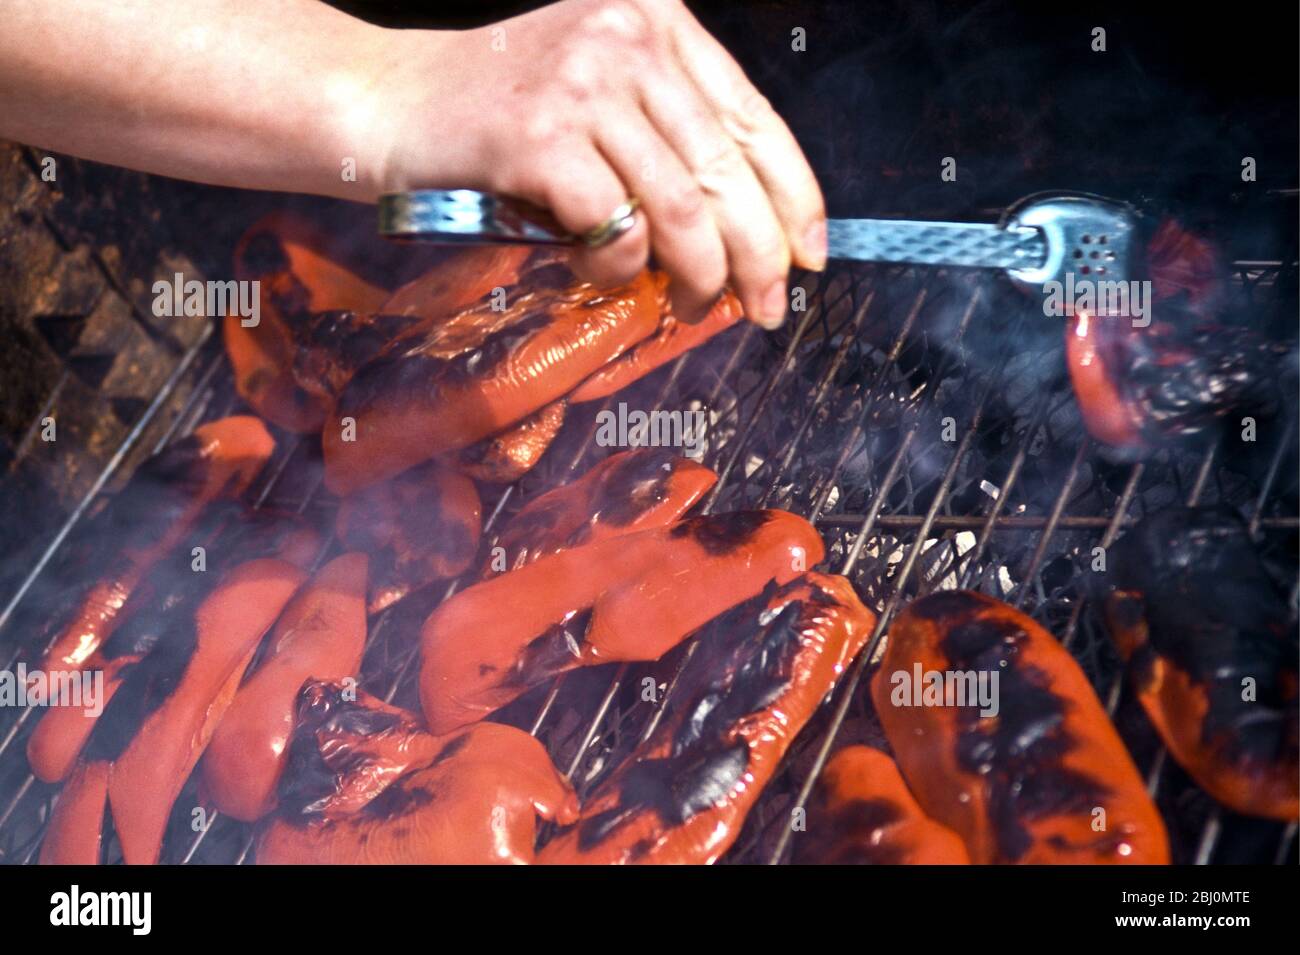 Grilling red peppers on a charcoal fired barbecue grill - Stock Photo